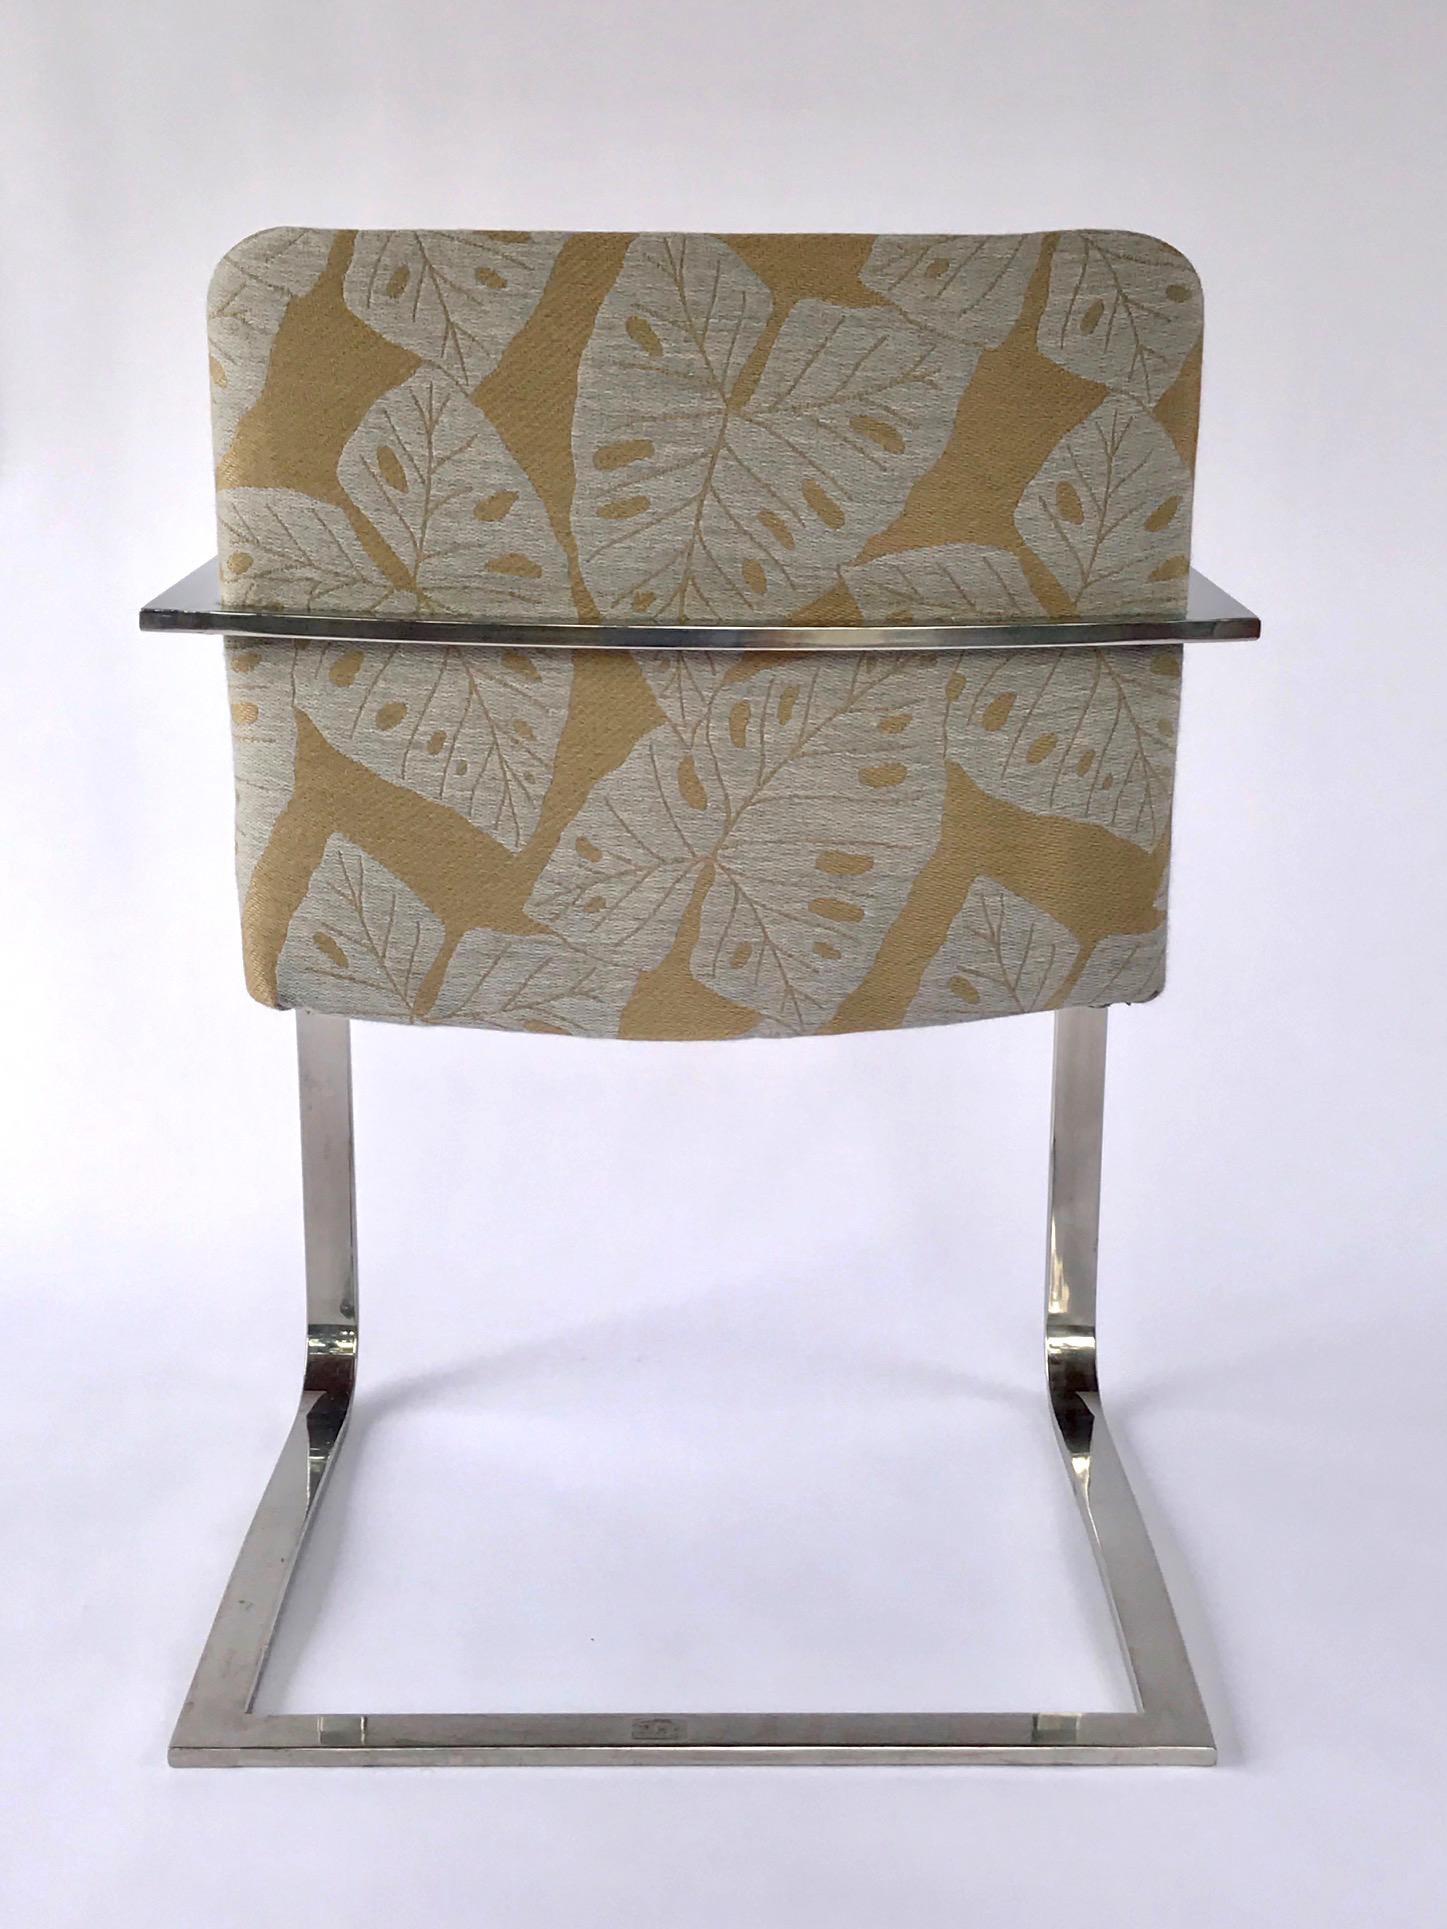 Stainless Steel Mid-Century Modern Chrome Desk Chair with Tropical Print by Brueton